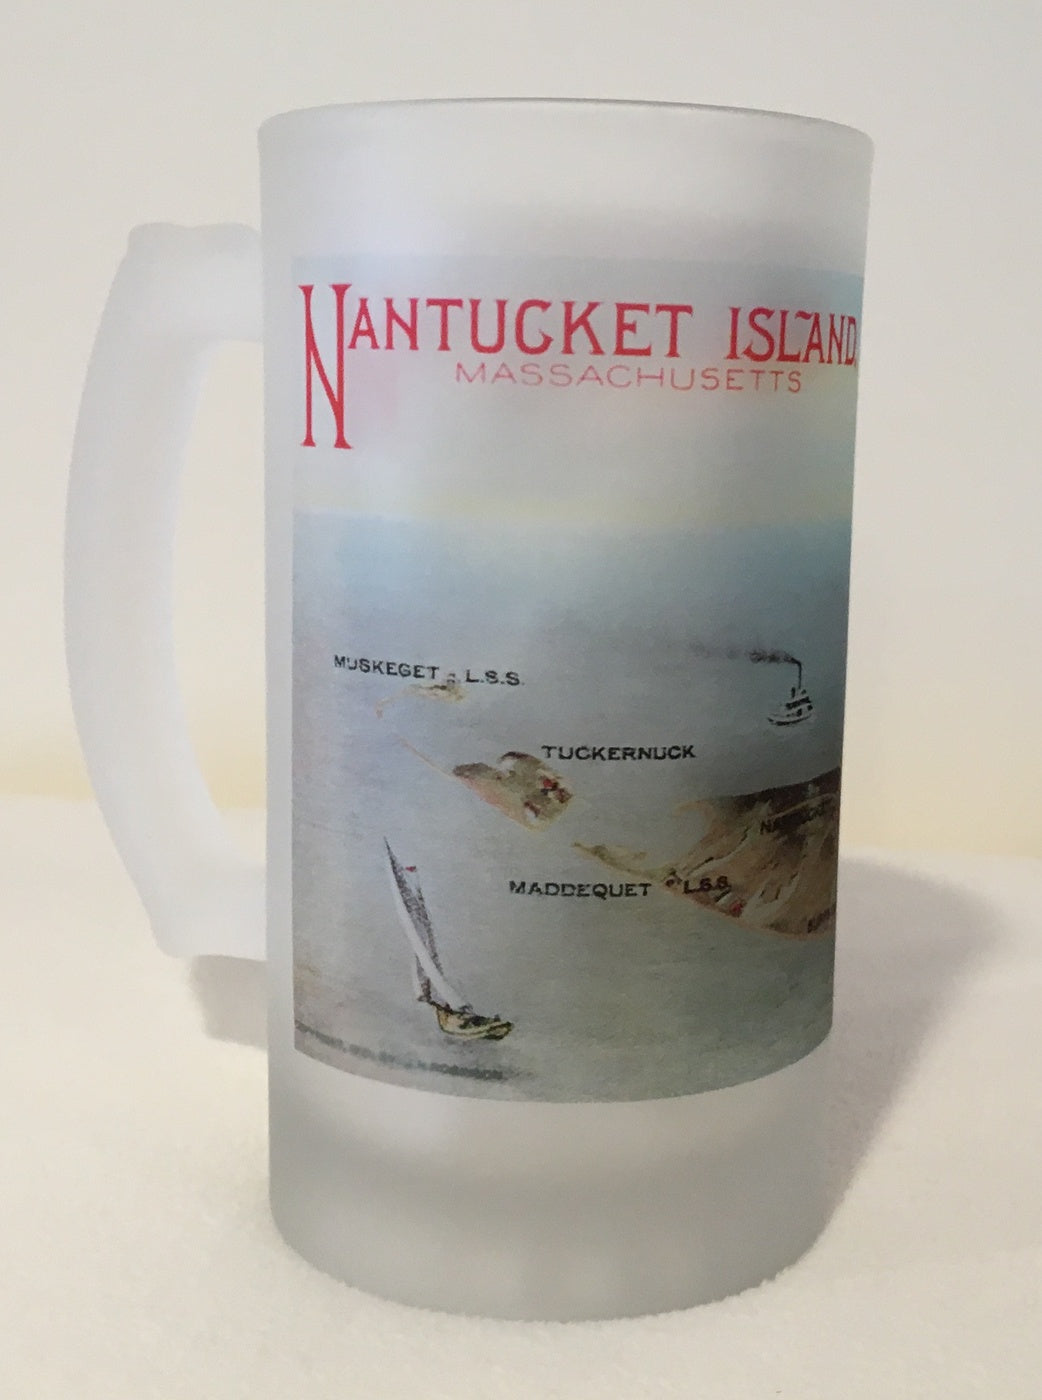 Colorful Frosted Glass Mug of The Island of Nantucket.